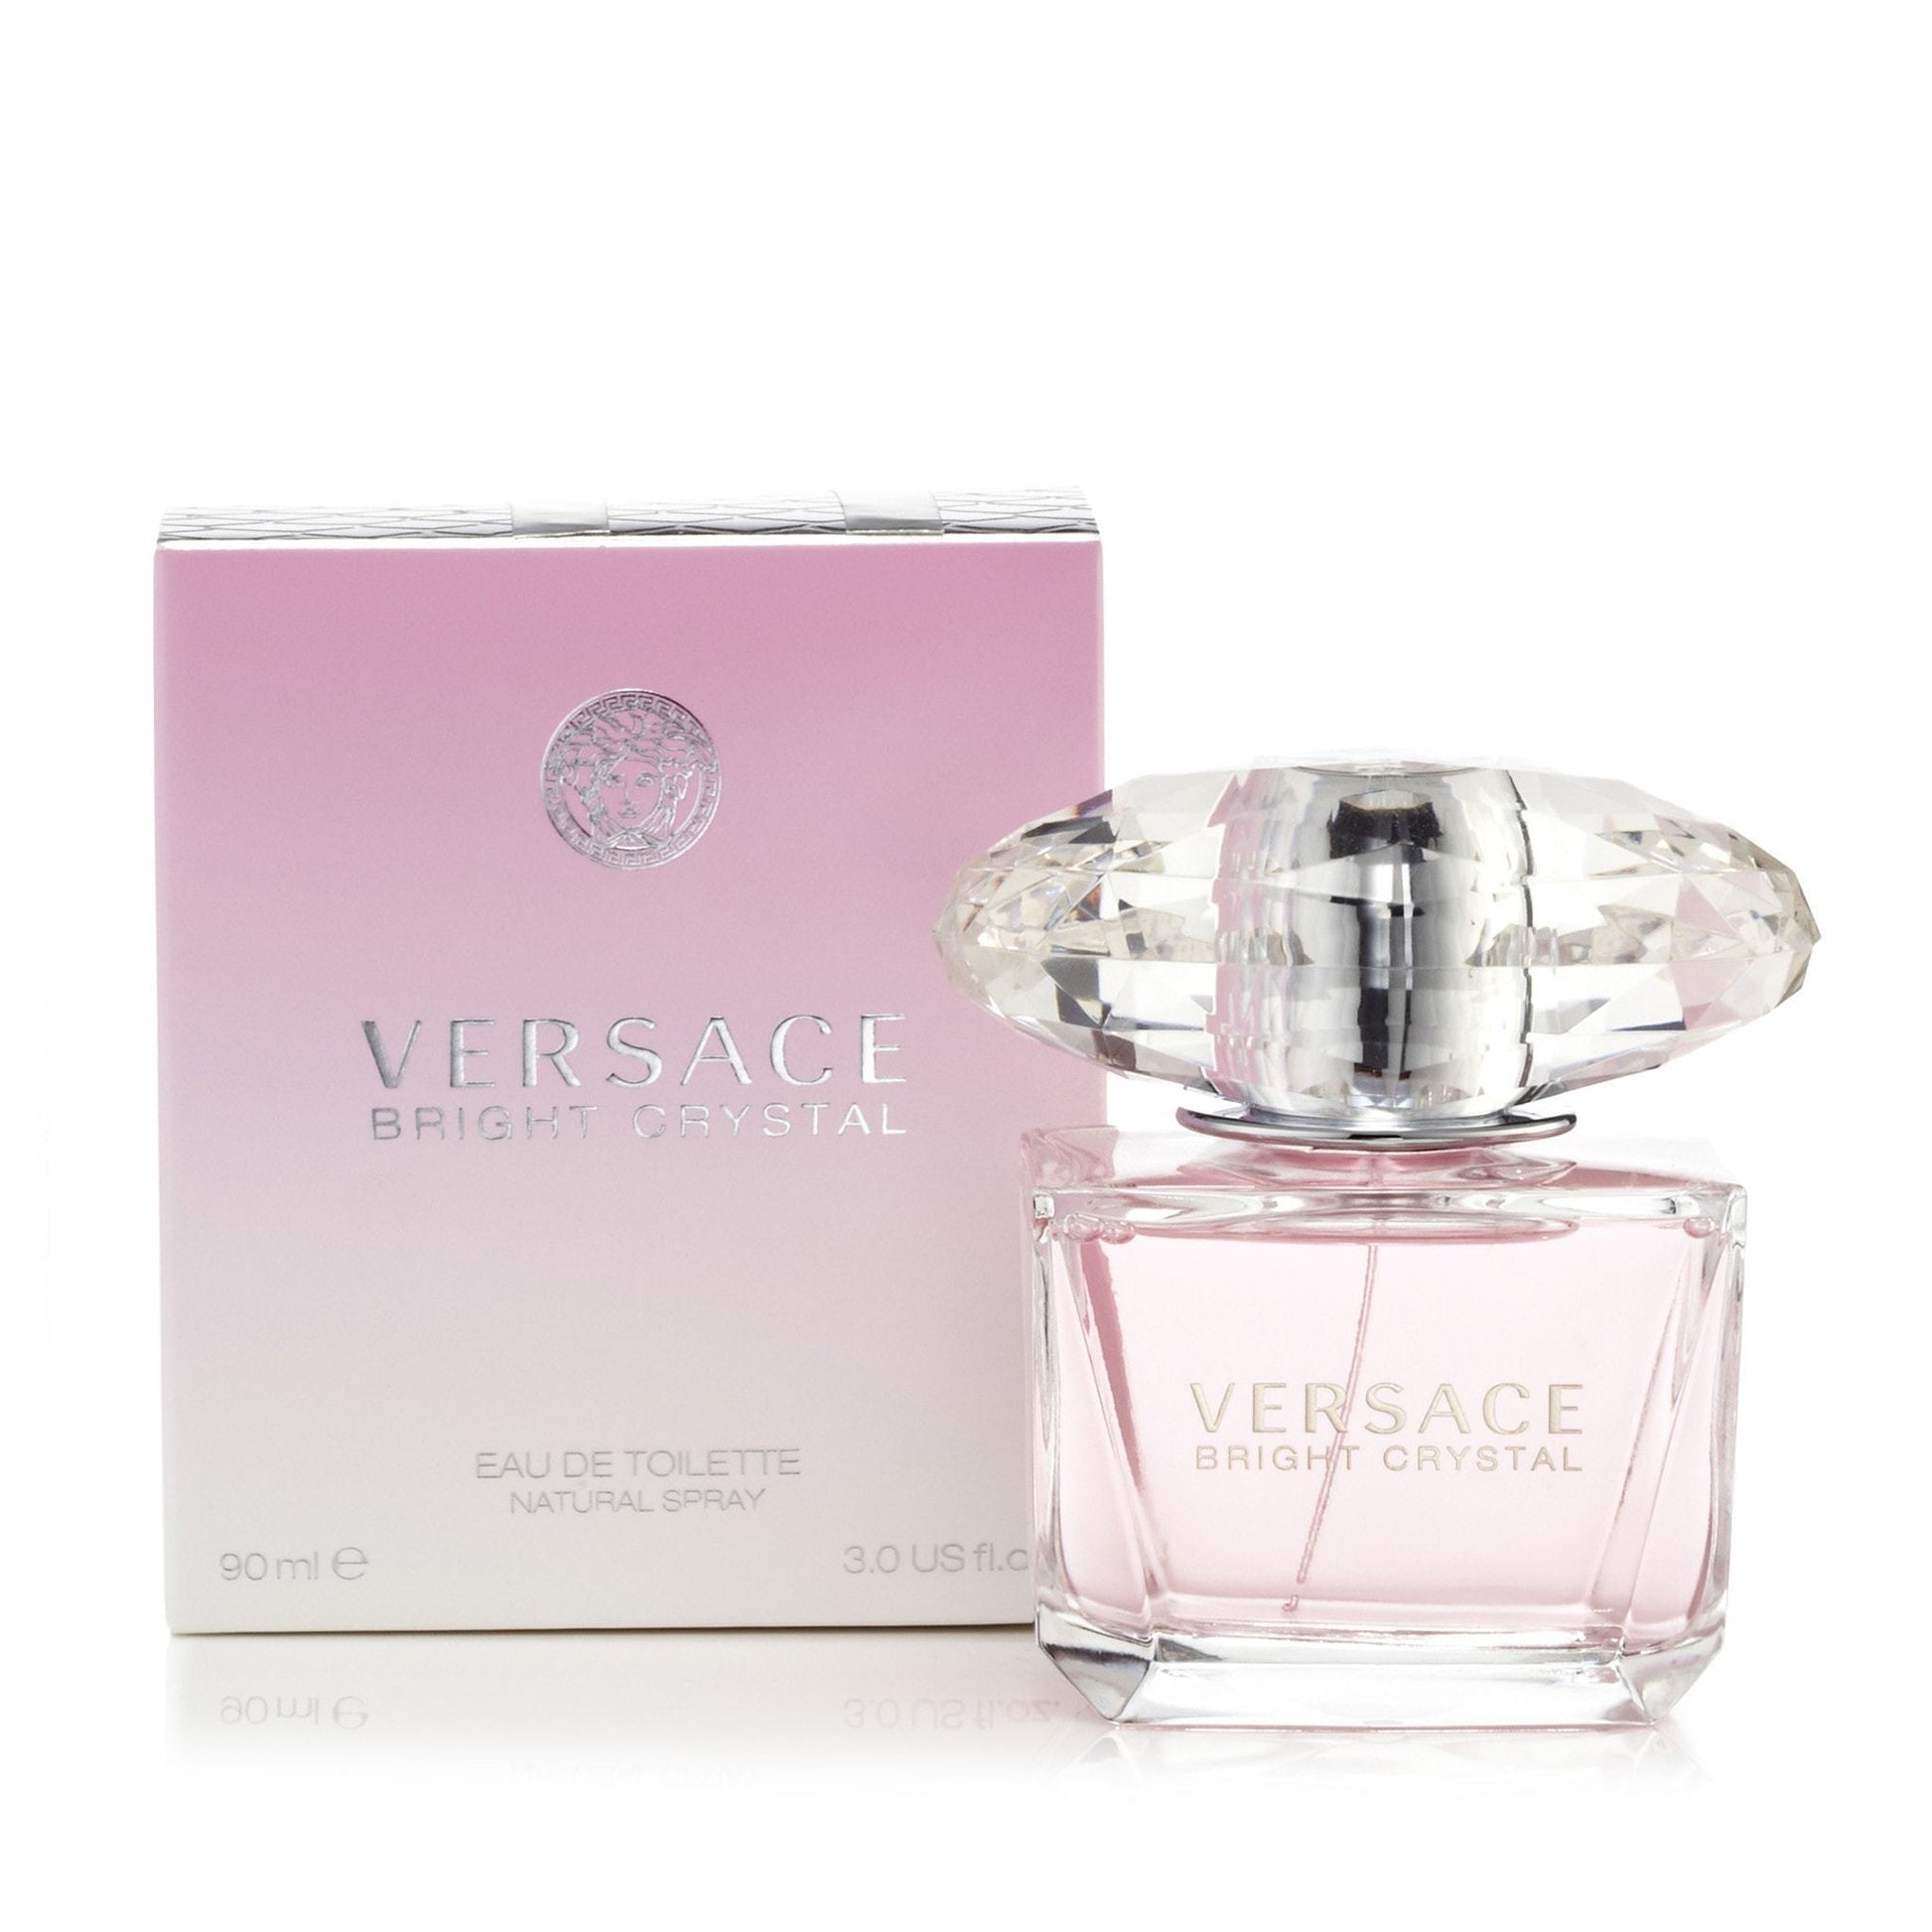 Bright Crystal Eau de Toilette Spray for Women by Versace, Product image 9